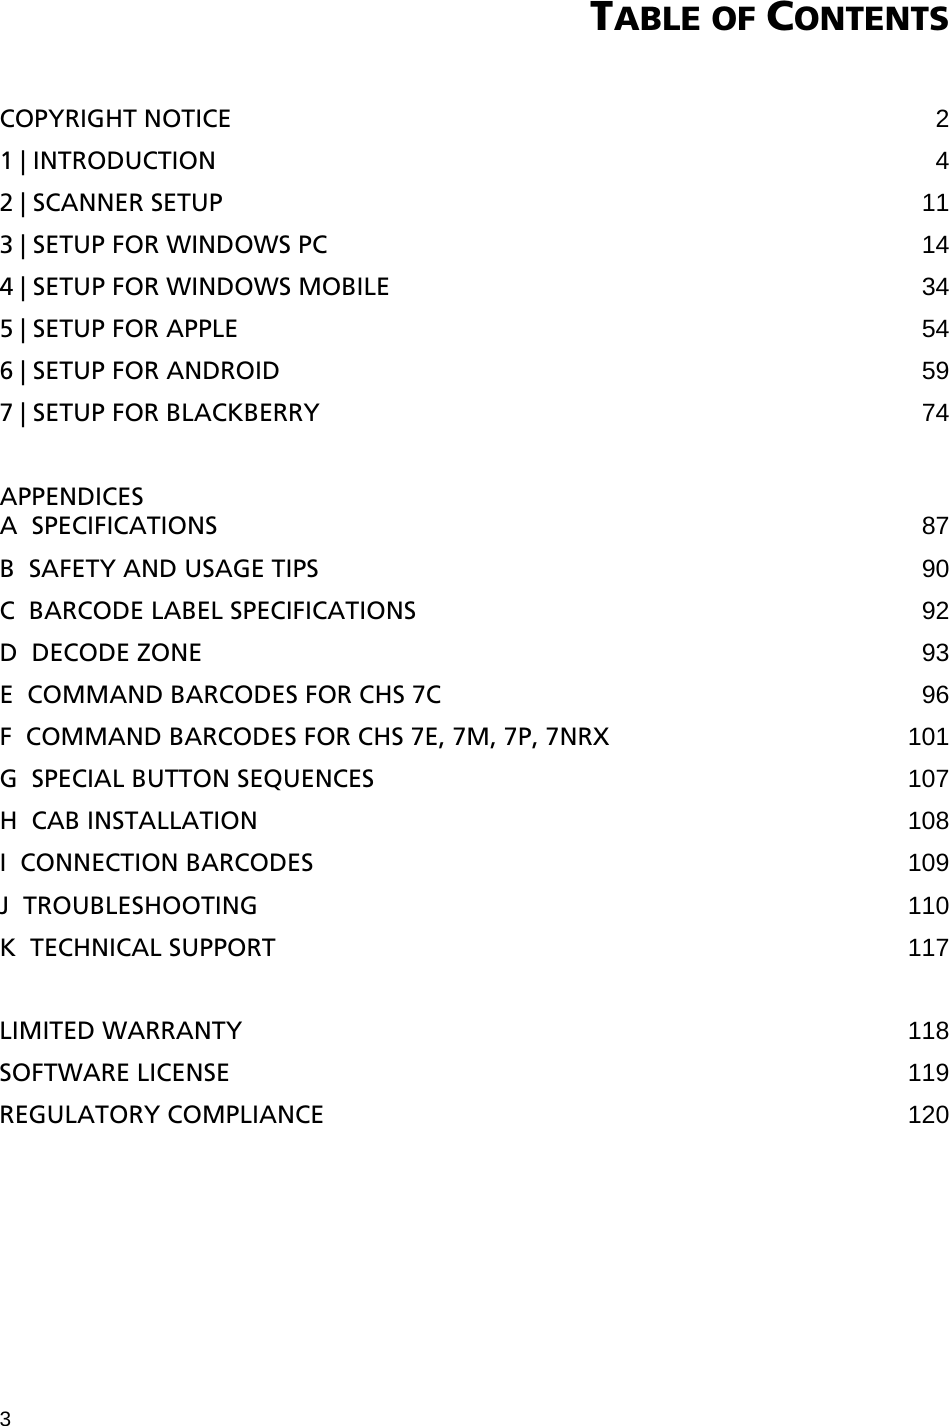 3 TABLE OF CONTENTS   COPYRIGHT NOTICE  2 1 | INTRODUCTION  4 2 | SCANNER SETUP 11 3 | SETUP FOR WINDOWS PC 14 4 | SETUP FOR WINDOWS MOBILE 34 5 | SETUP FOR APPLE 54 6 | SETUP FOR ANDROID 59 7 | SETUP FOR BLACKBERRY 74  APPENDICES A  SPECIFICATIONS 87 B  SAFETY AND USAGE TIPS 90 C  BARCODE LABEL SPECIFICATIONS 92 D  DECODE ZONE 93 E  COMMAND BARCODES FOR CHS 7C 96 F  COMMAND BARCODES FOR CHS 7E, 7M, 7P, 7NRX 101 G  SPECIAL BUTTON SEQUENCES 107 H  CAB INSTALLATION 108 I  CONNECTION BARCODES 109 J  TROUBLESHOOTING 110 K  TECHNICAL SUPPORT 117  LIMITED WARRANTY 118 SOFTWARE LICENSE 119 REGULATORY COMPLIANCE 120 